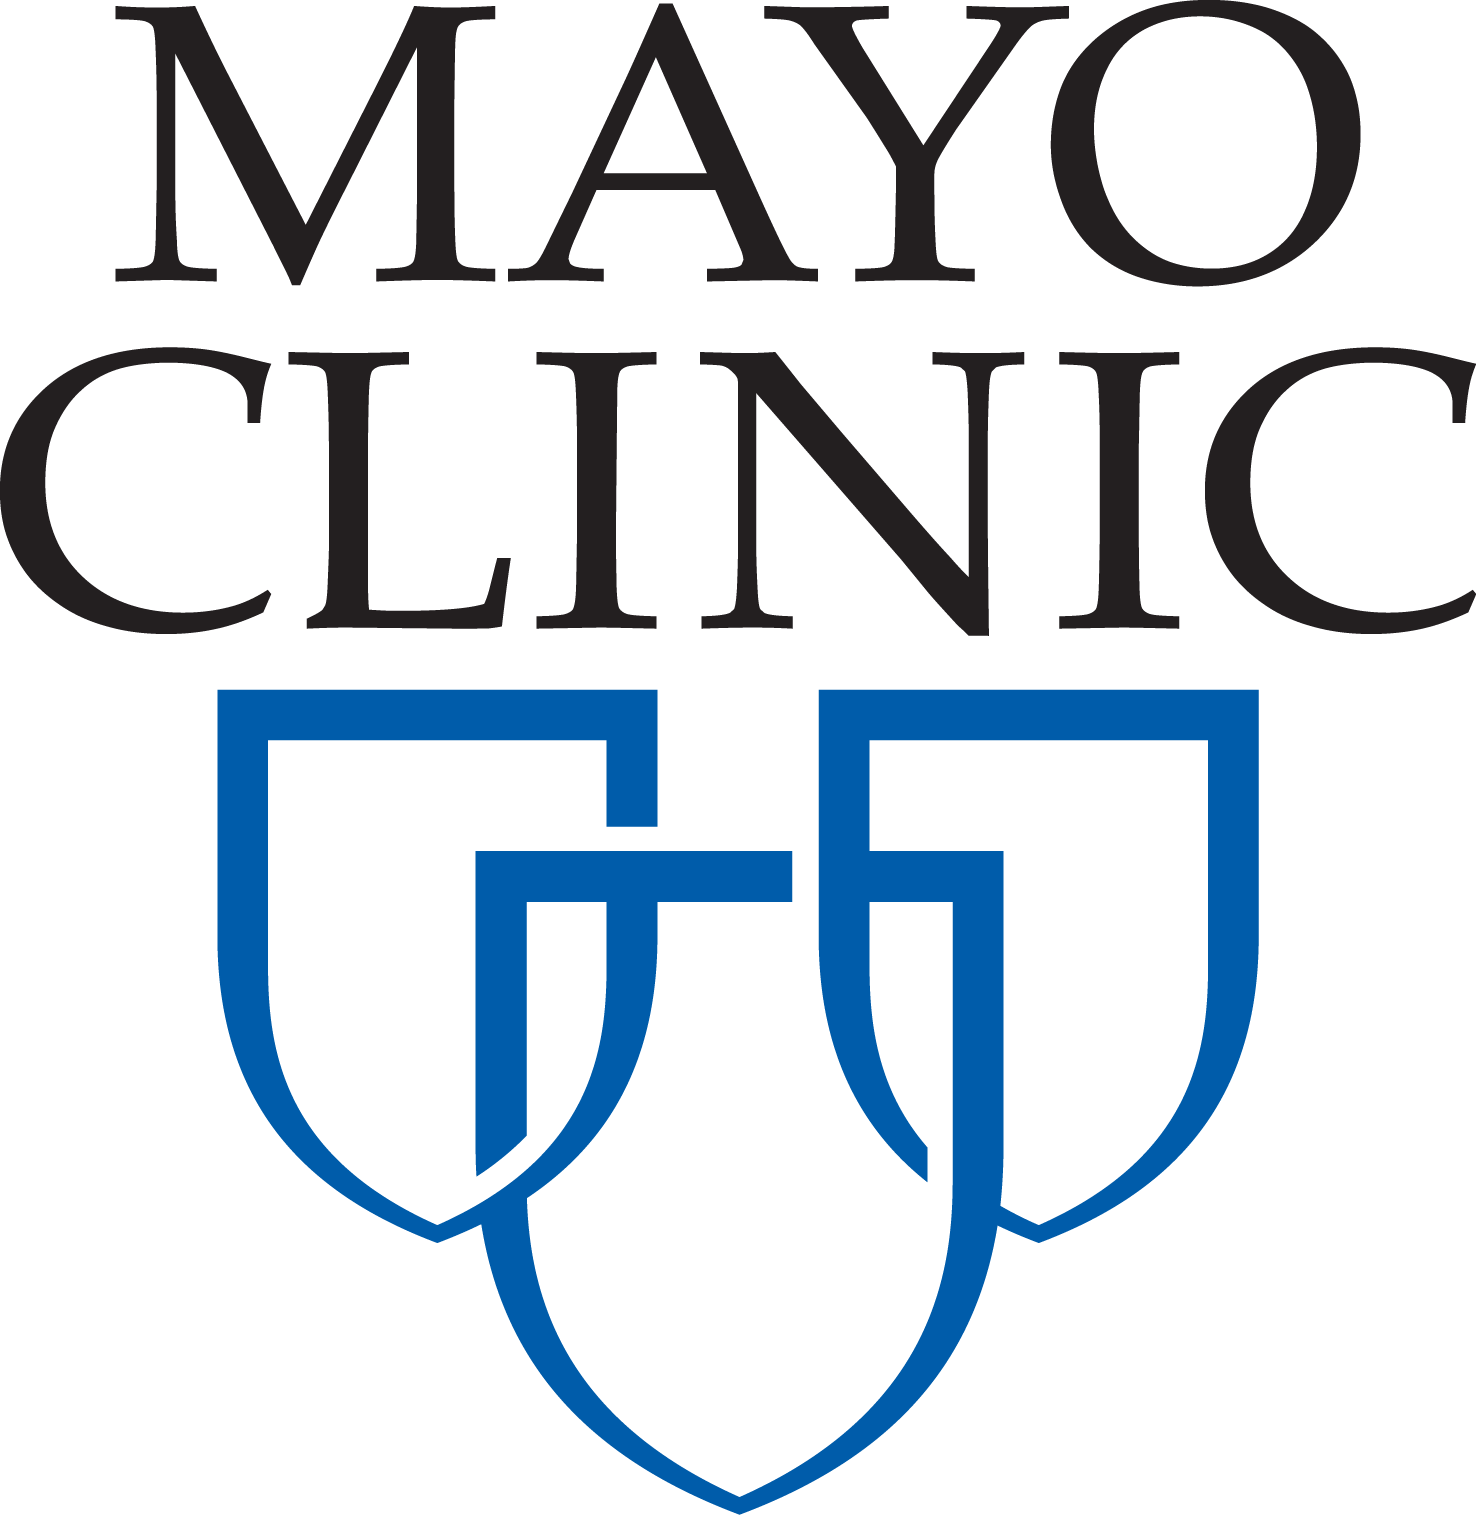 Mayo Clinic partners with Global Access to Cancer Care